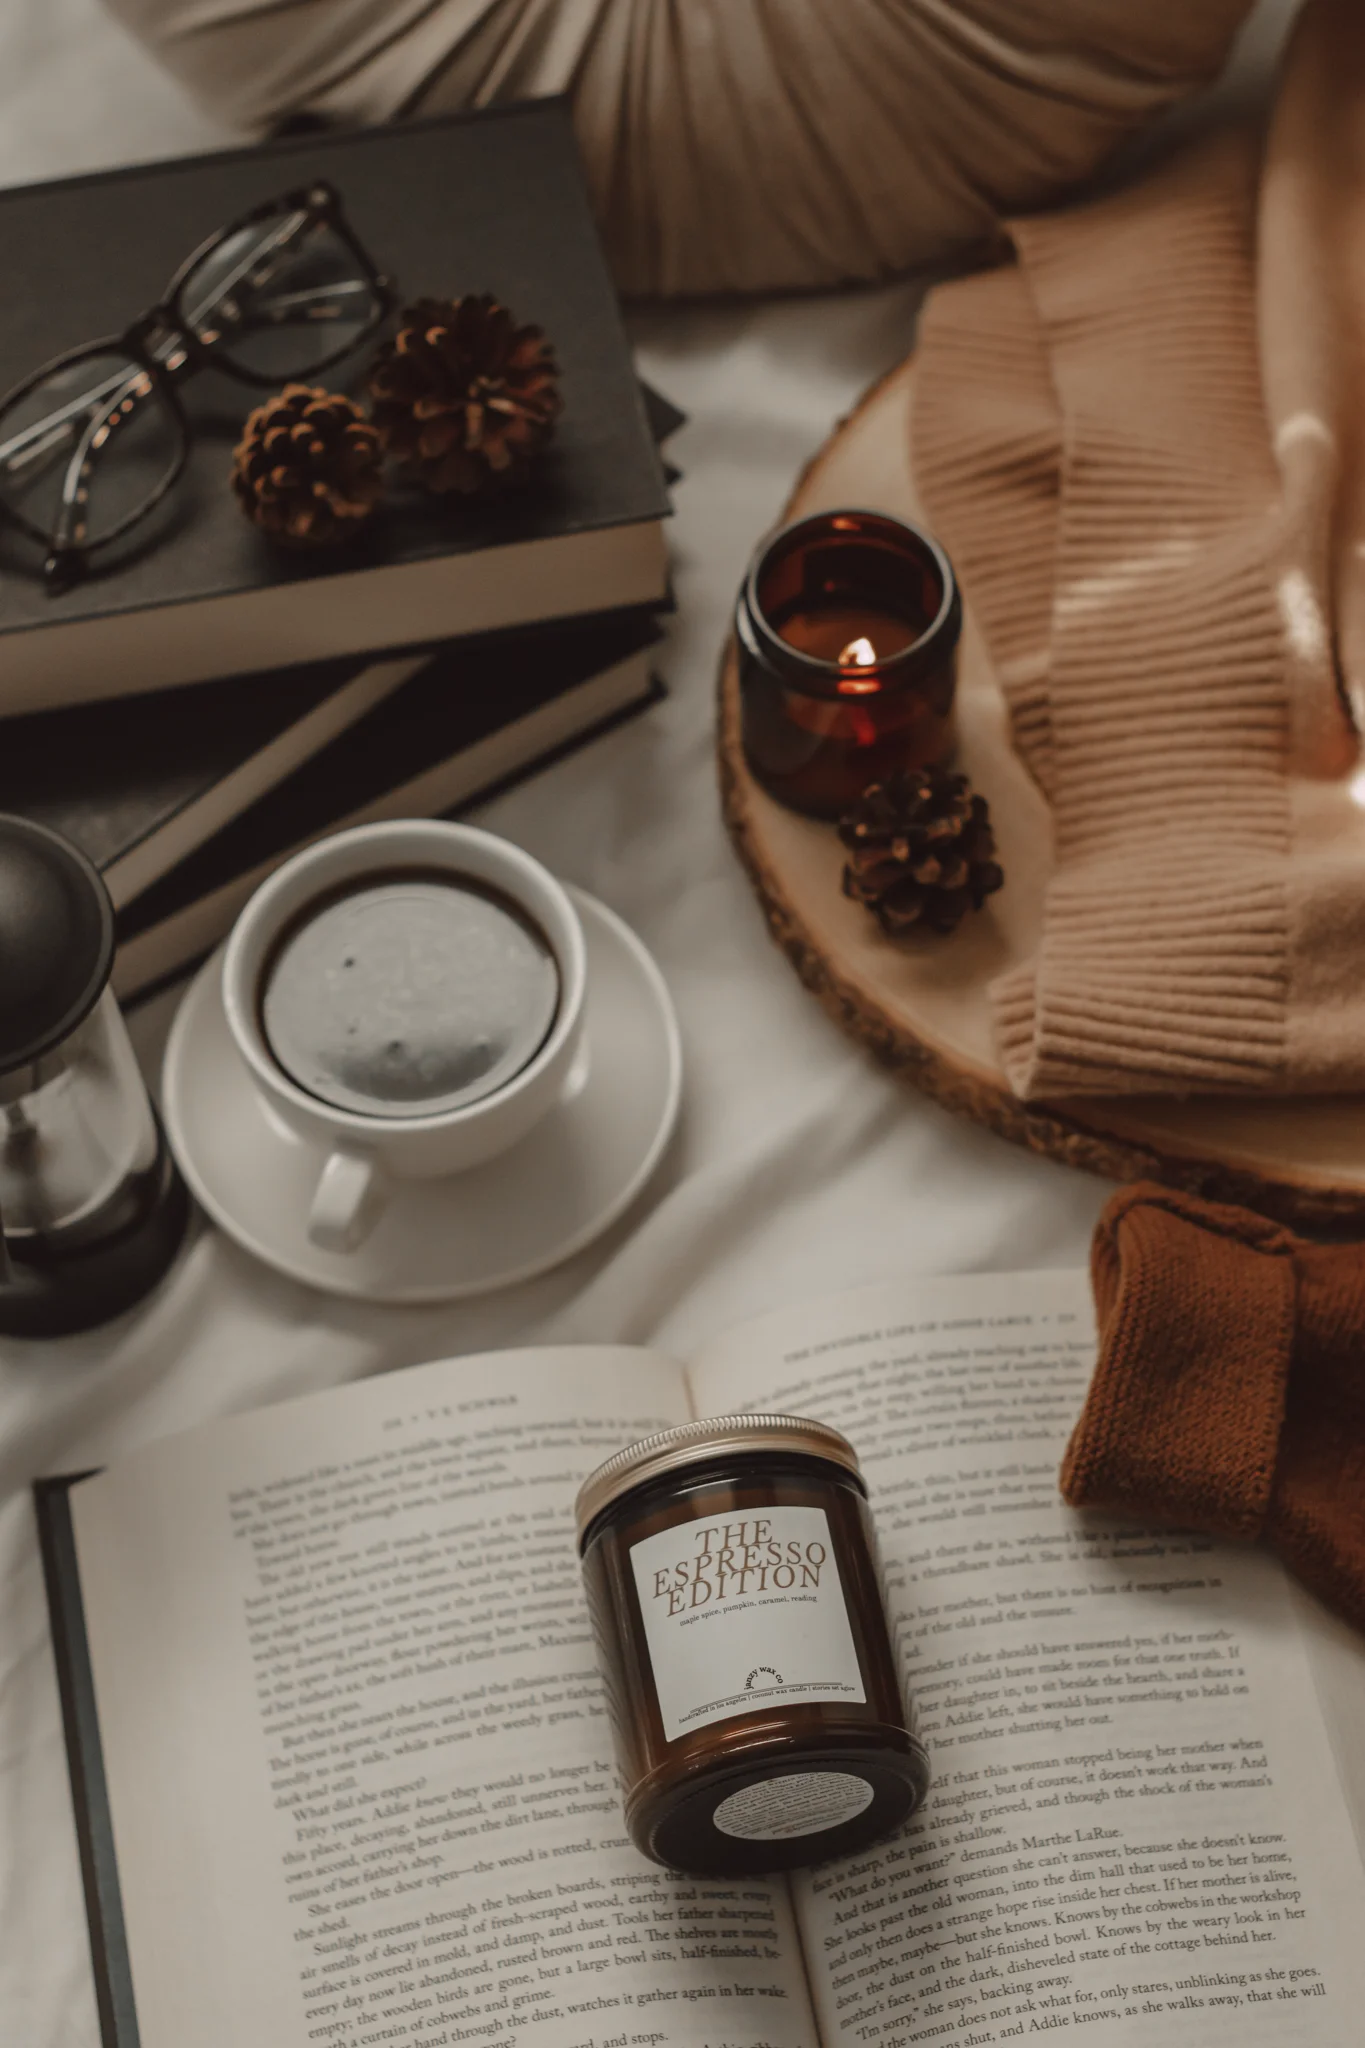 June 2024 New Book Releases by The Espresso Edition cozy bookish blog